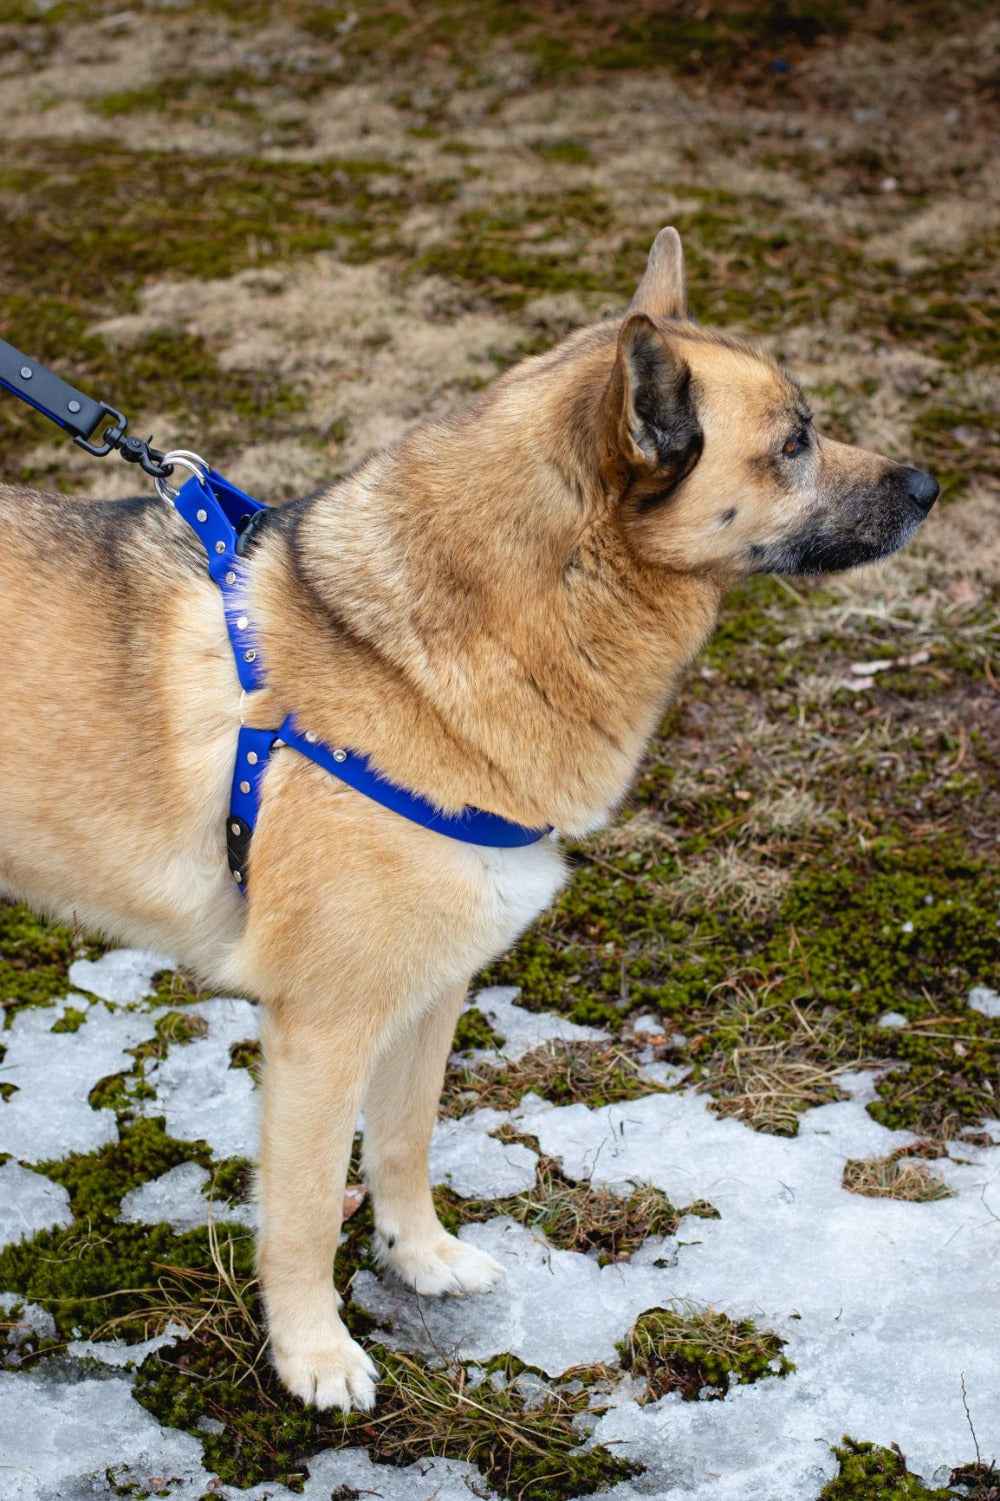 Backwoods Dog BioThane step-in harness in royal blue on alaskan husky dog standing in moss and snow